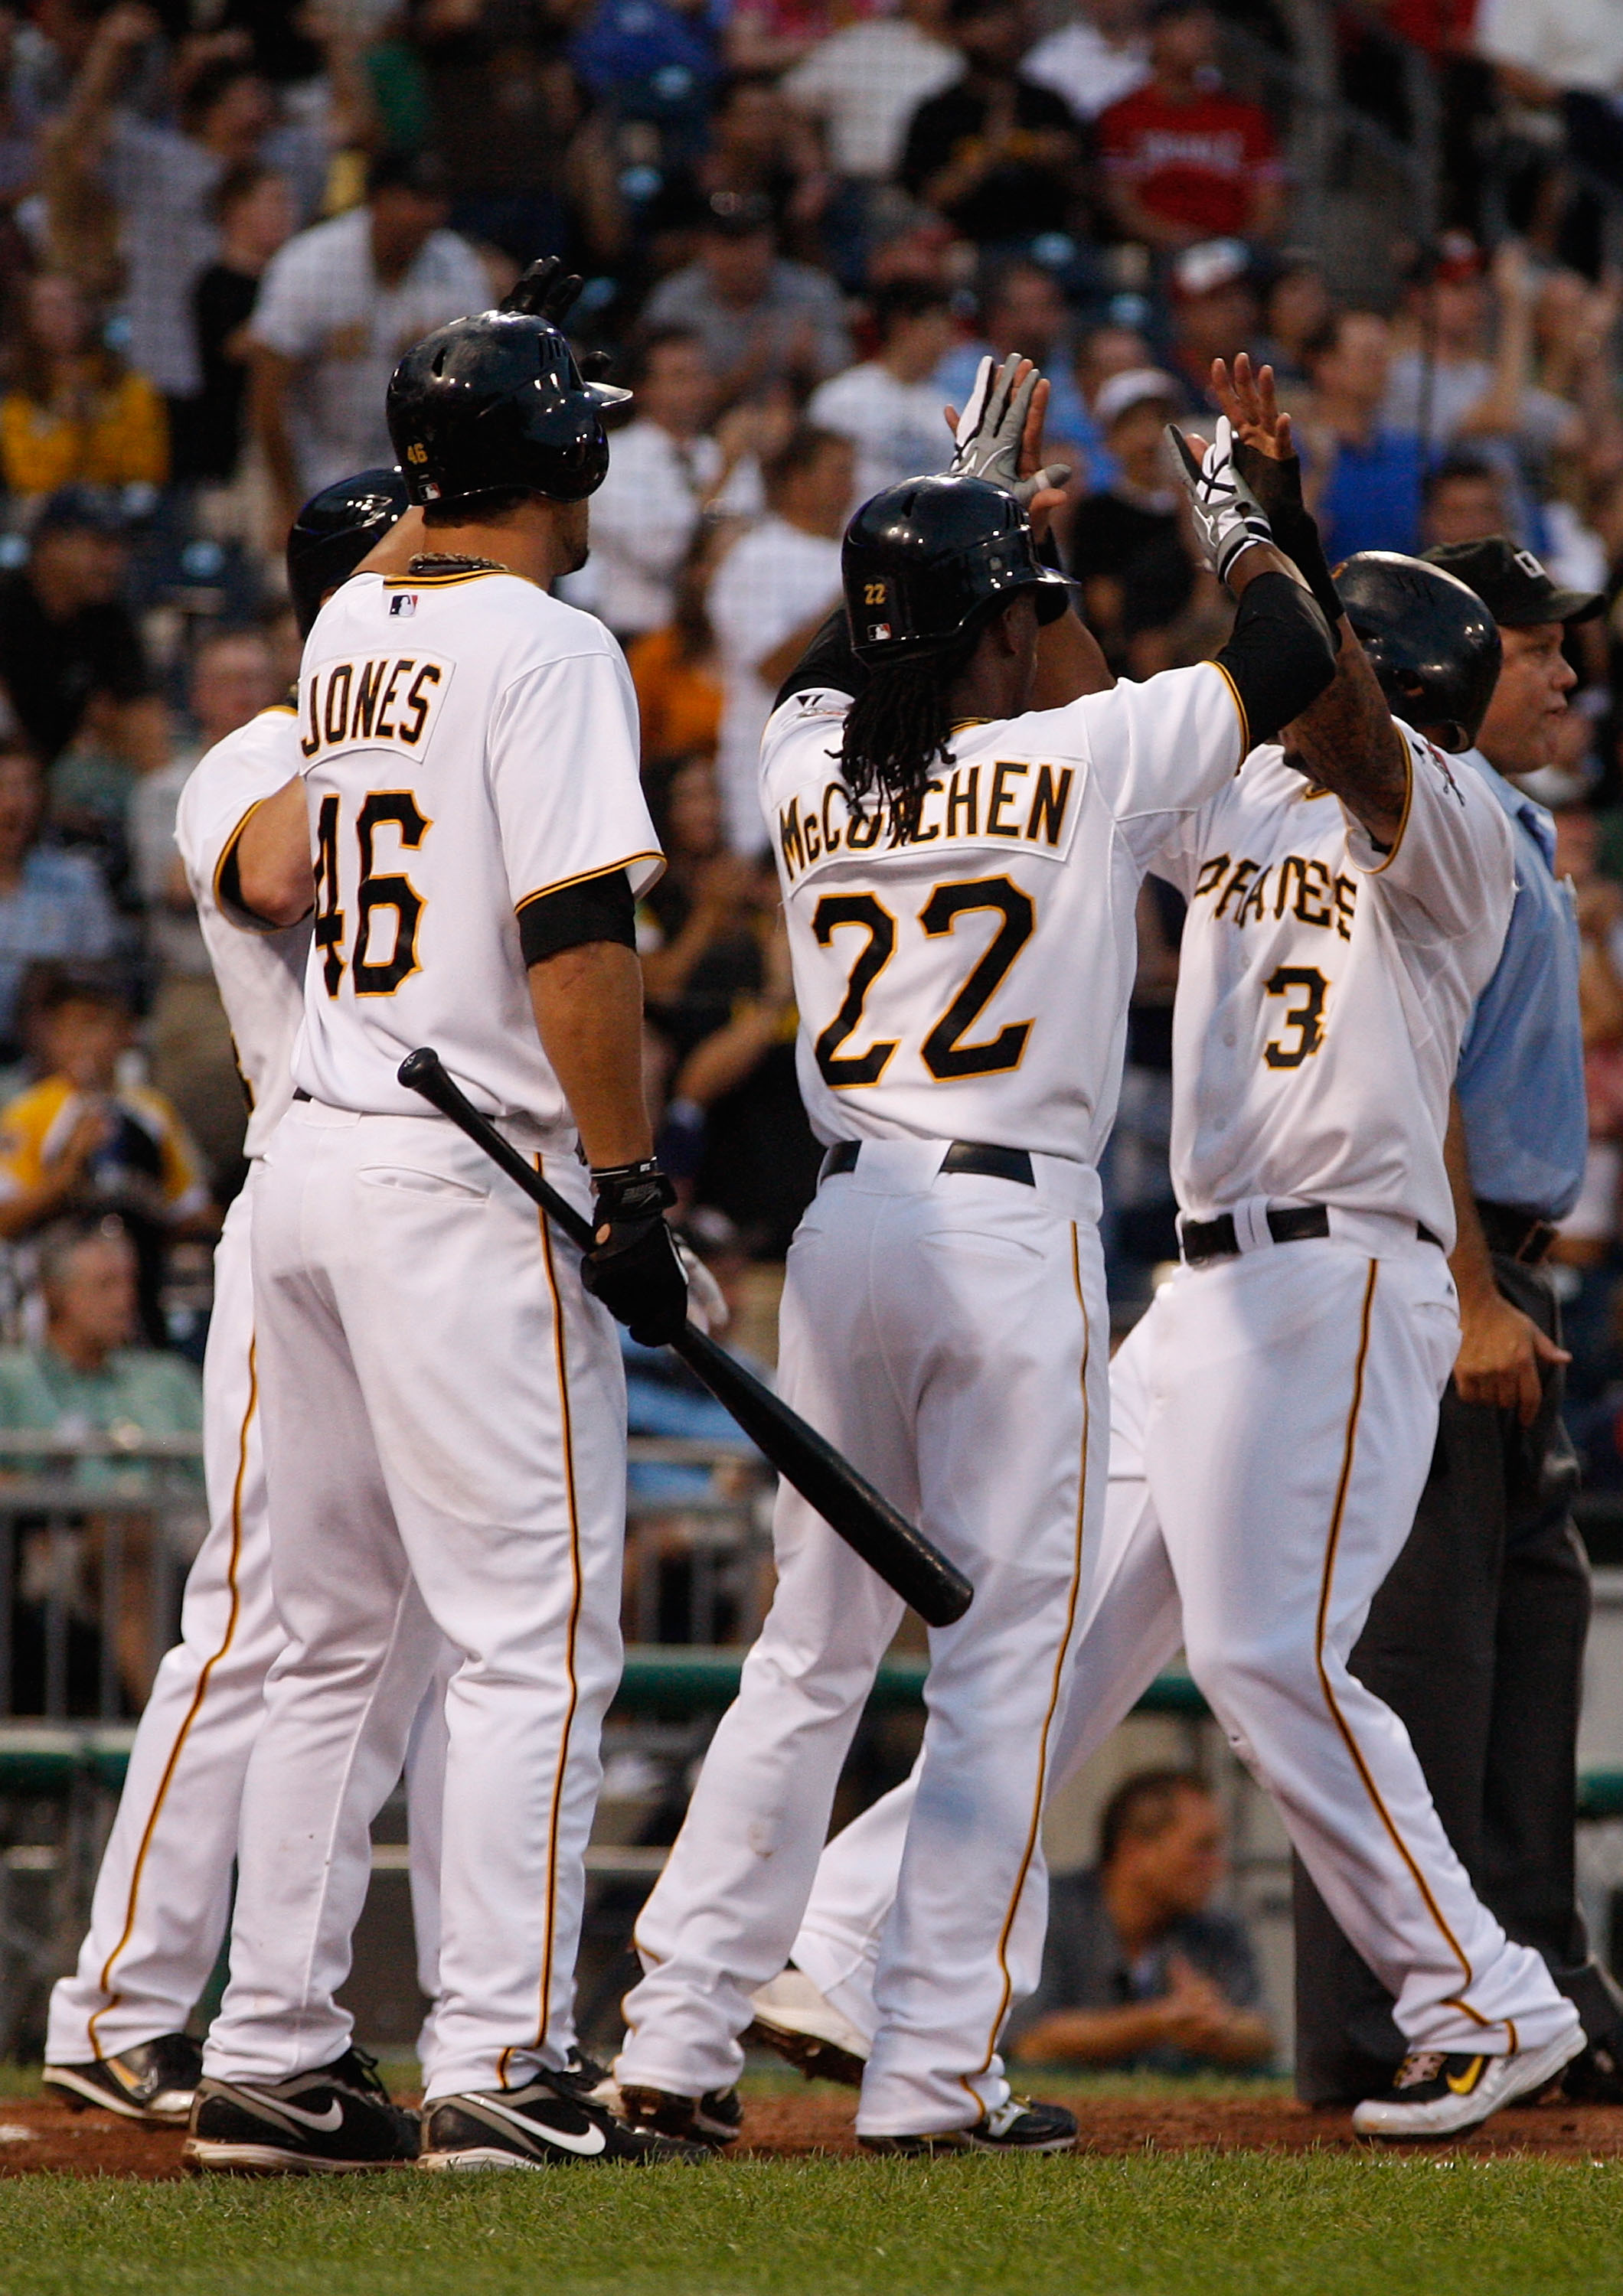 PITTSBURGH - AUGUST 25:  Jose Tabata #31 of the Pittsburgh Pirates celebrates with teammates Andrew McCutchen #22 and Garrett Jones #46 after scoring against the St. Louis Cardinals during the game on August 25, 2010 at PNC Park in Pittsburgh, Pennsylvani